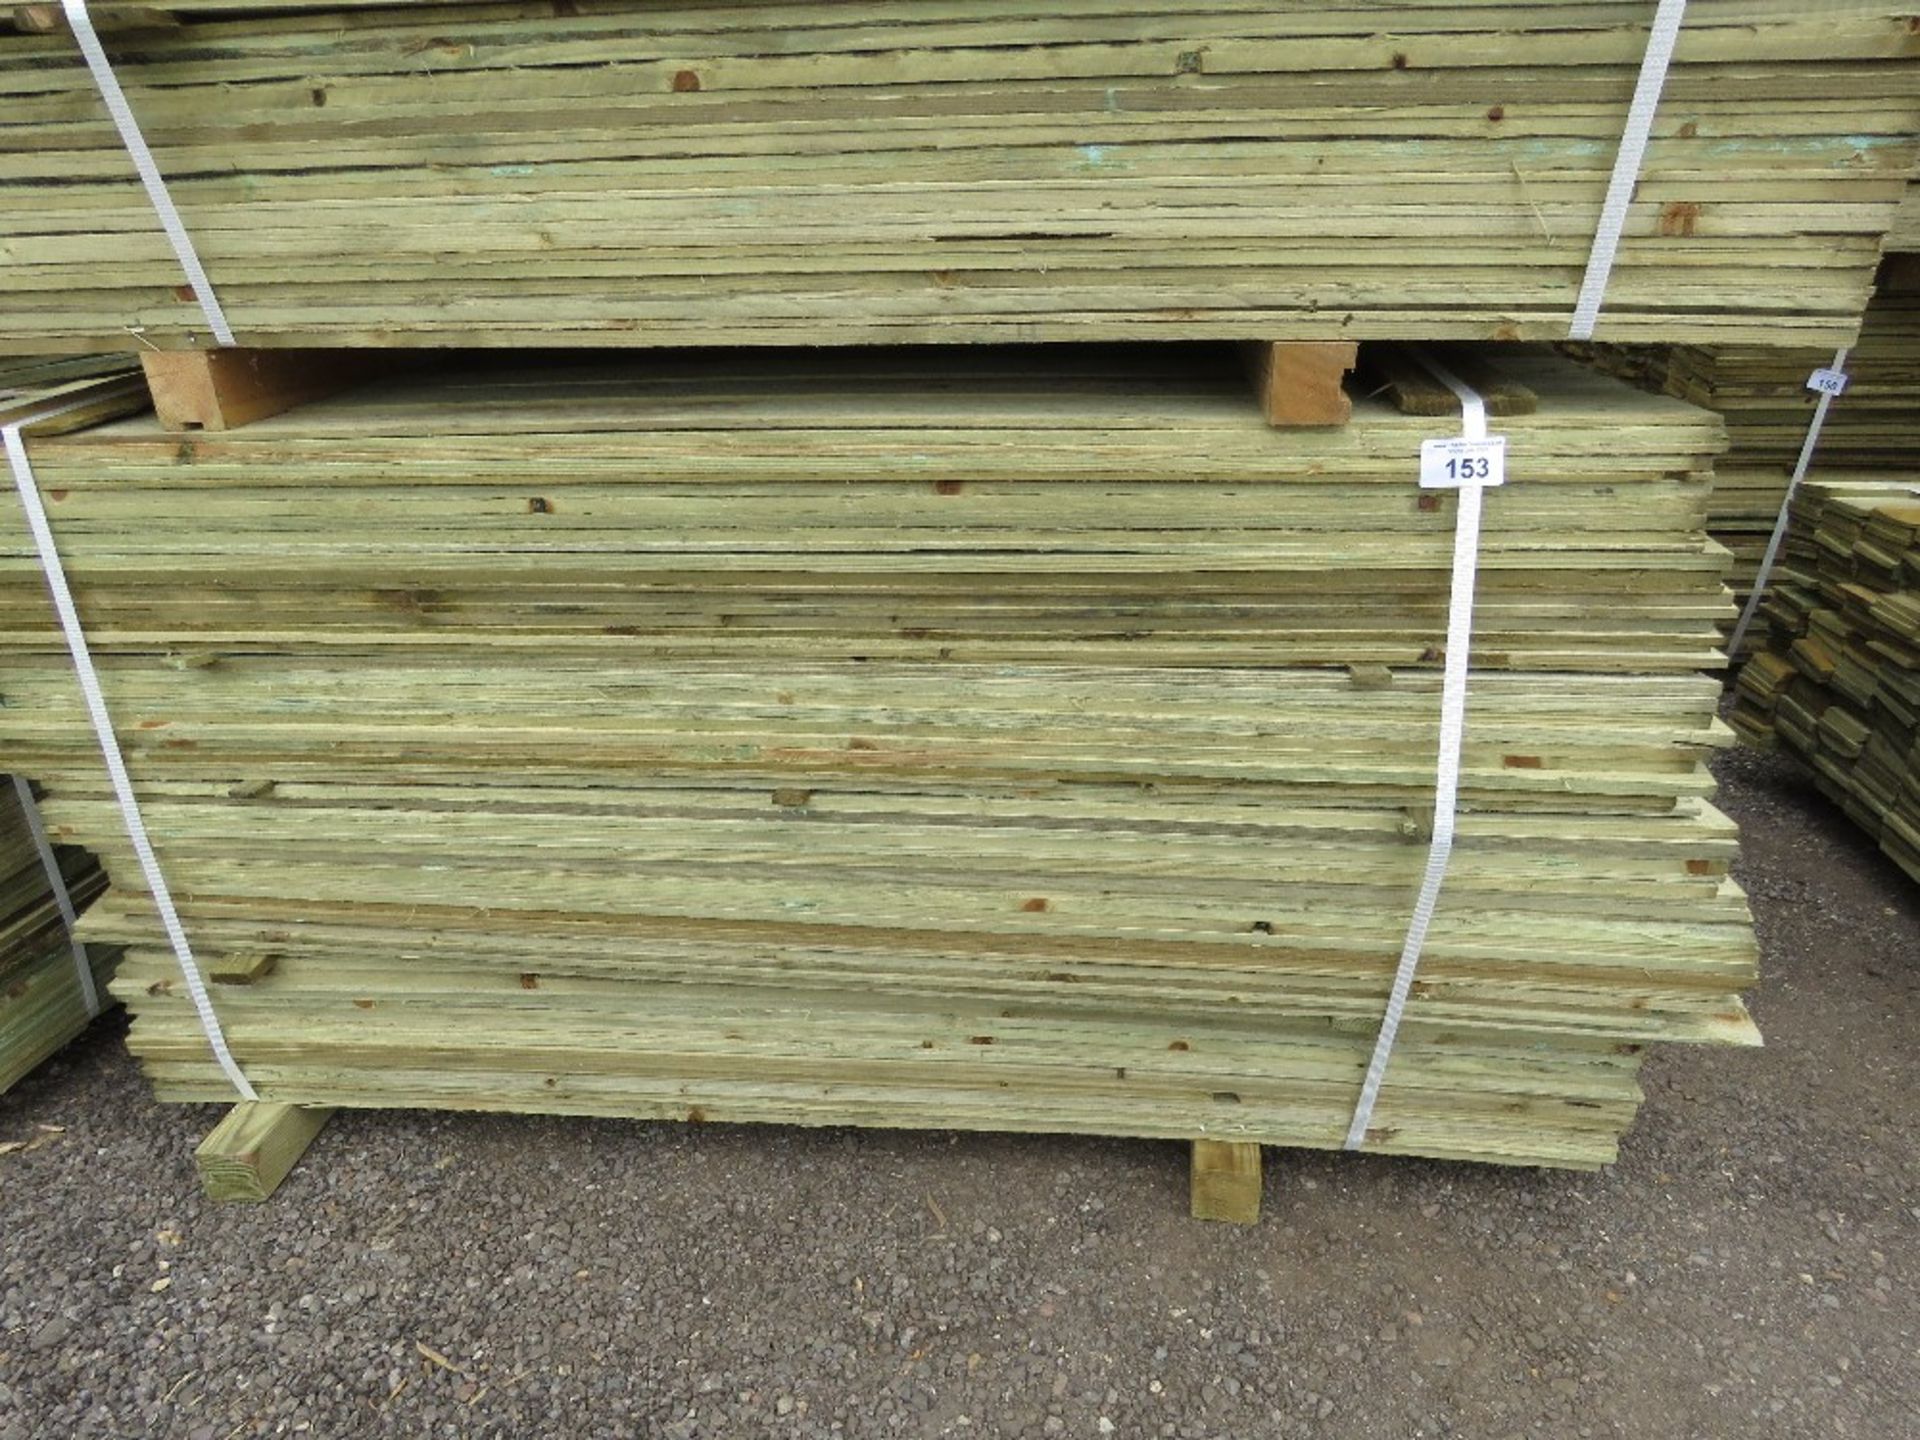 EXTRA LARGE PACK OF PRESSURE TREATED FEATHER EDGE FENCE CLADDING TIMBER BOARDS. 1.65M LENGTH X 100MM